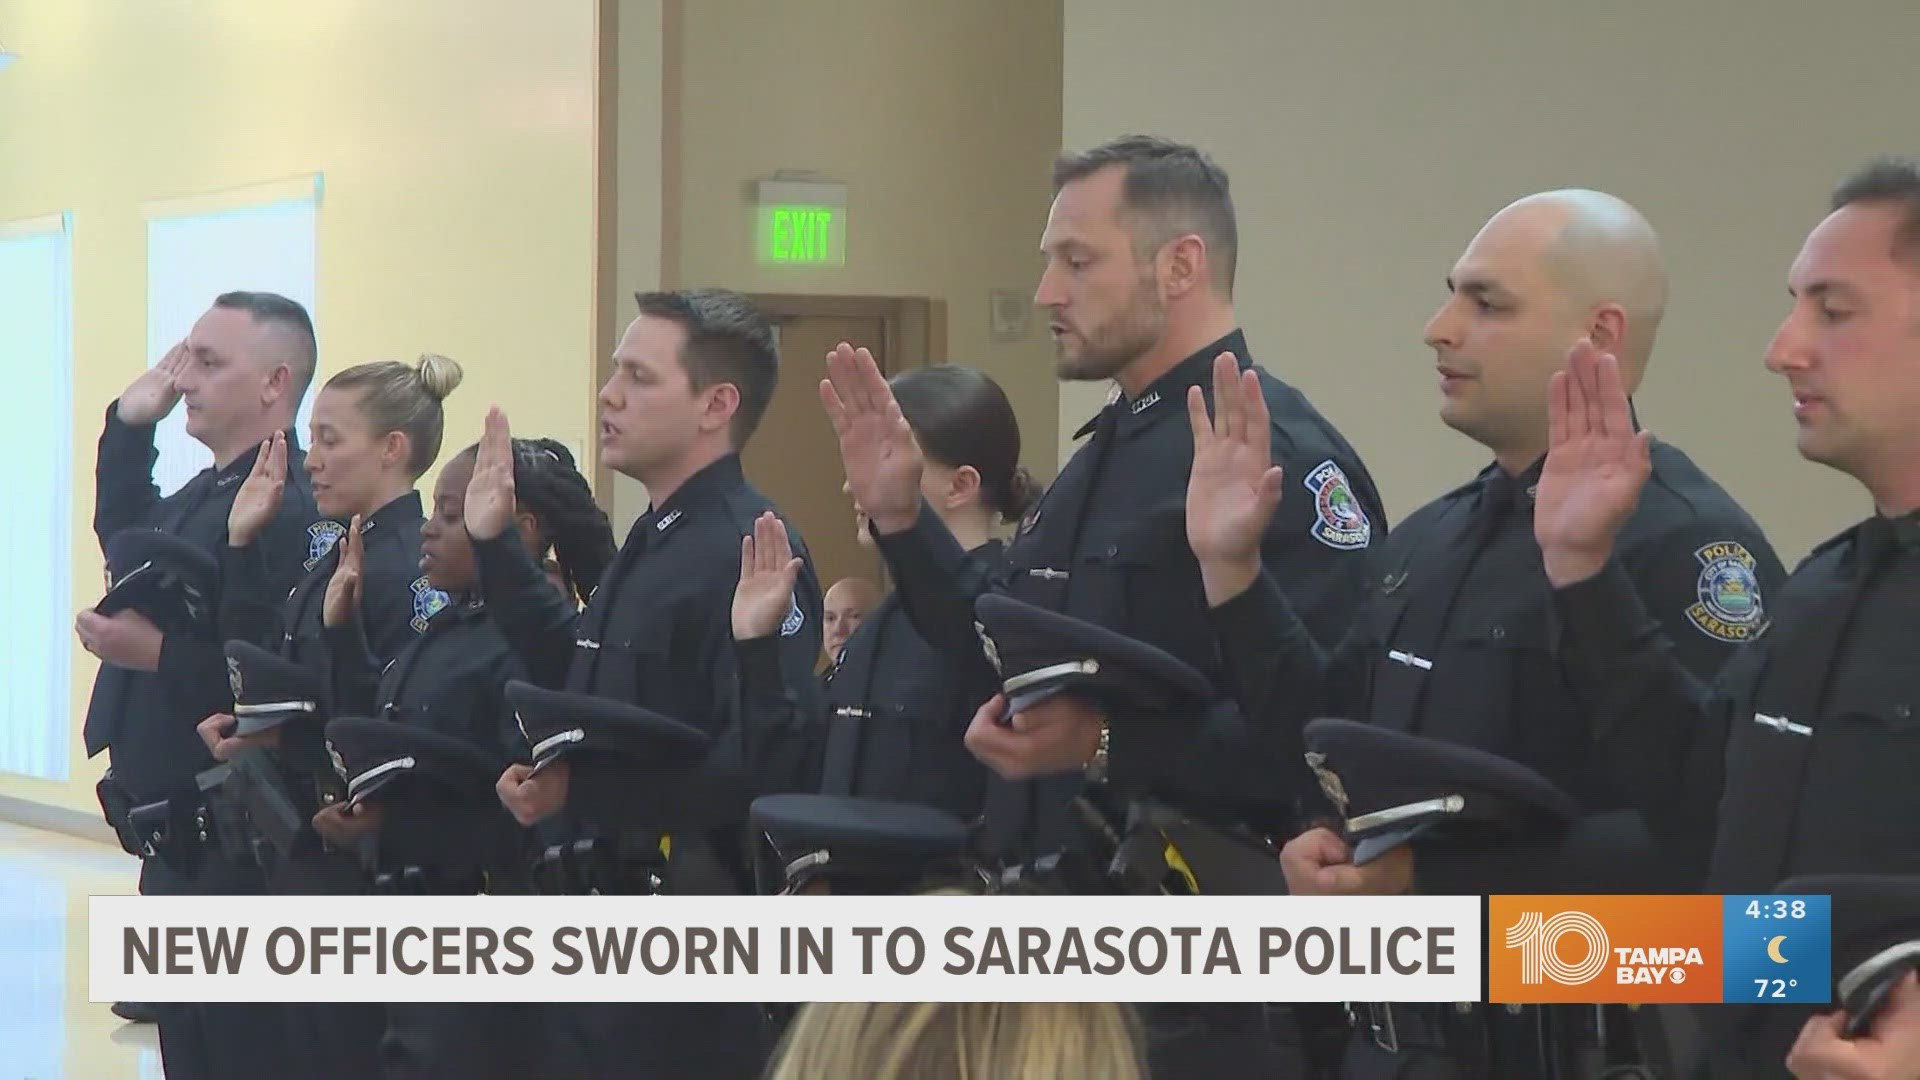 Nine recruits took their oath and were sworn-in on Thursday. A majority came from other police forces, recruited through the state's "Be a Florida Hero" program.